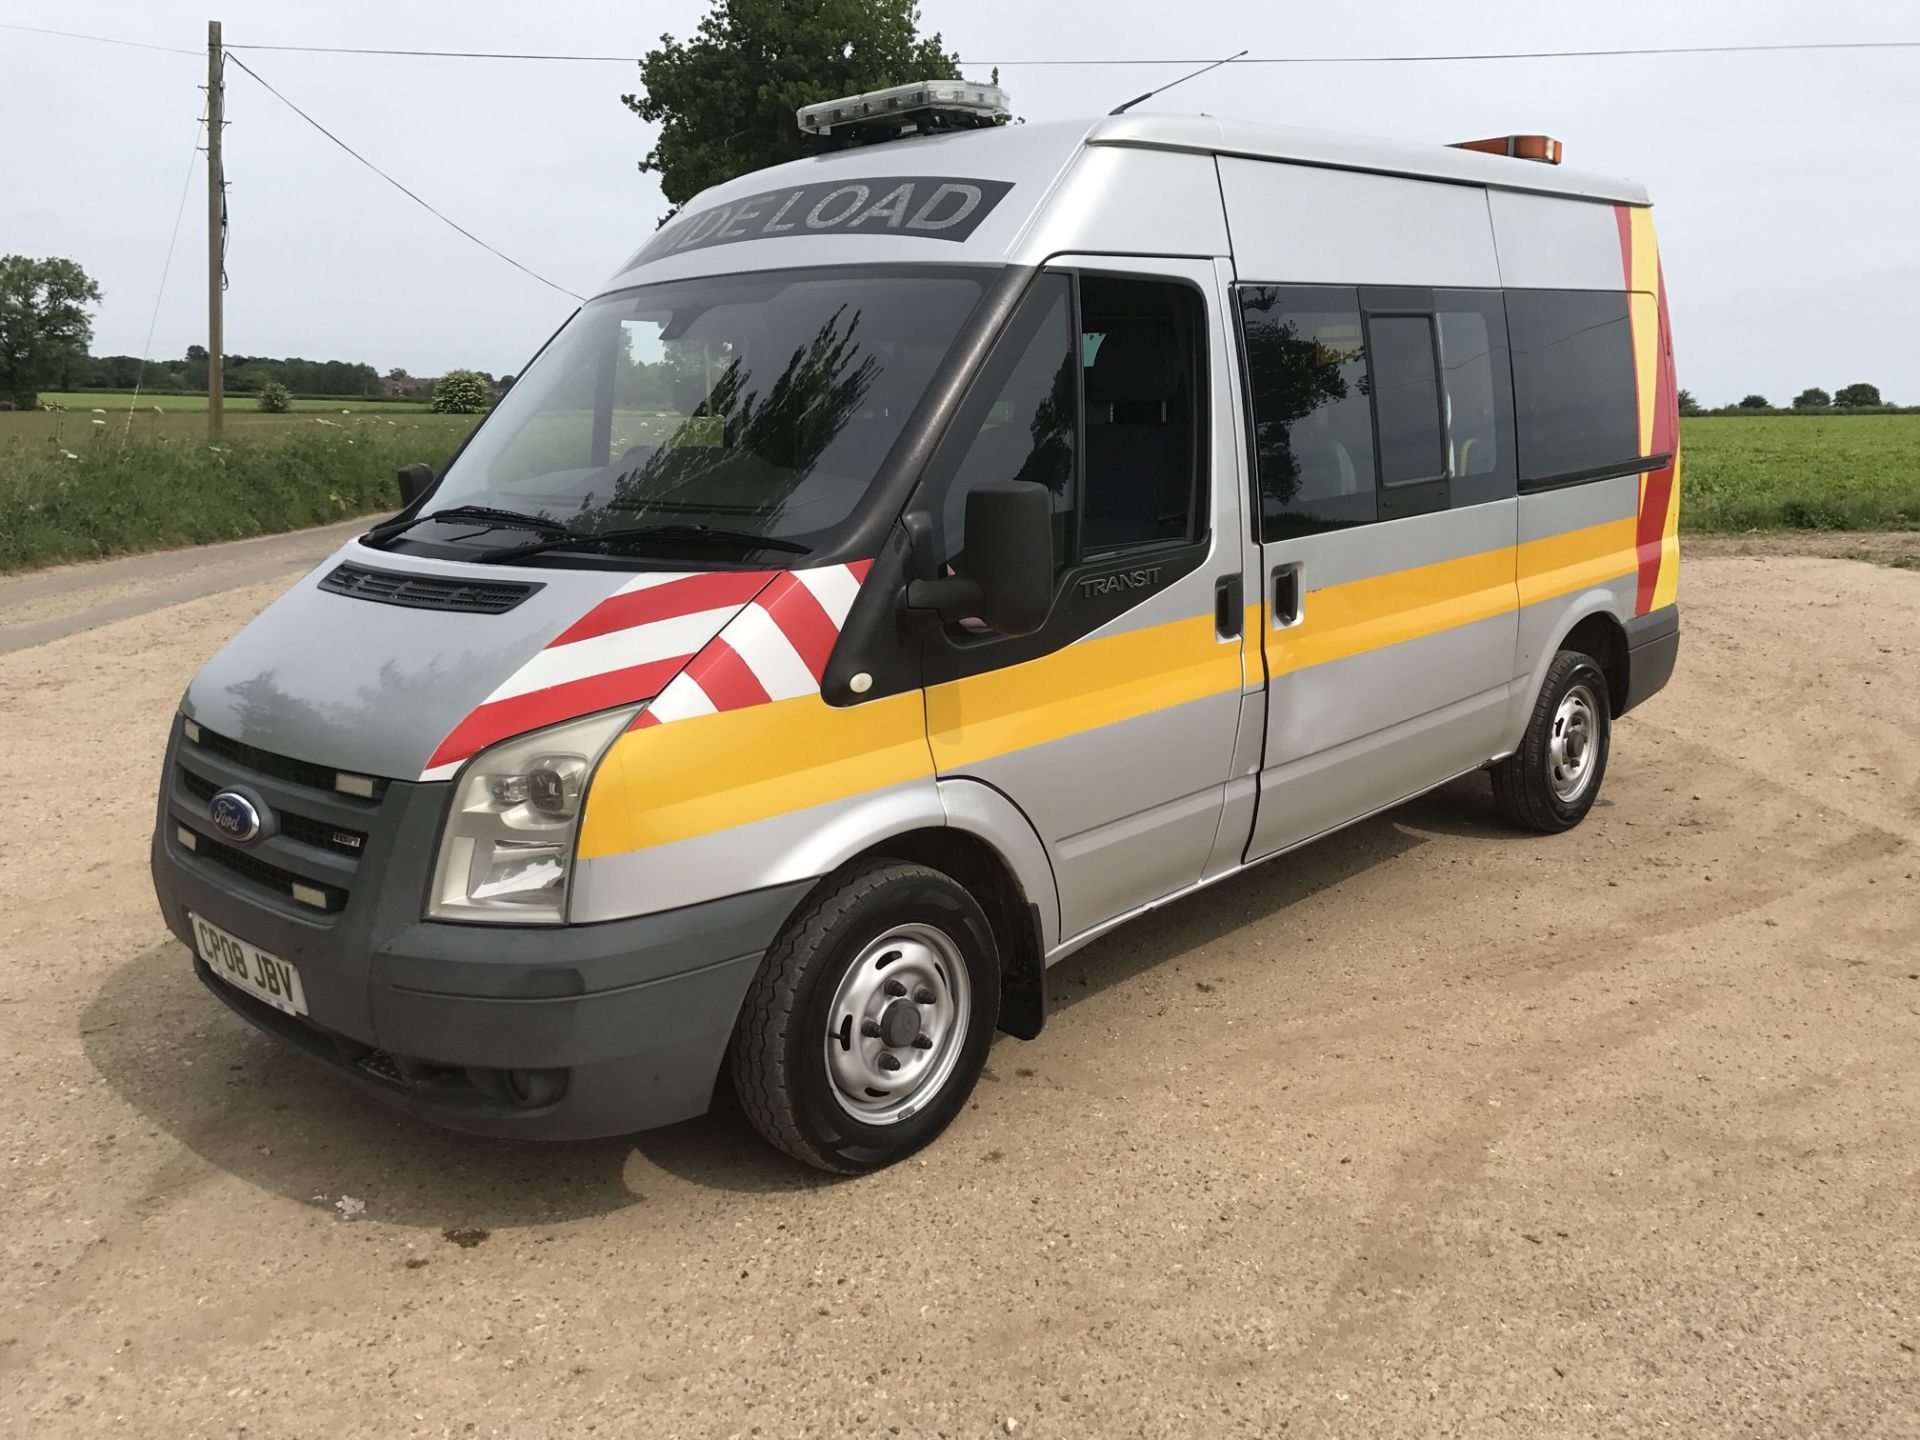 FORD TRANSIT 110 9 SEATER MINIBUS 0808 BEEN USED FOR WIDE LOAD SUPPORT